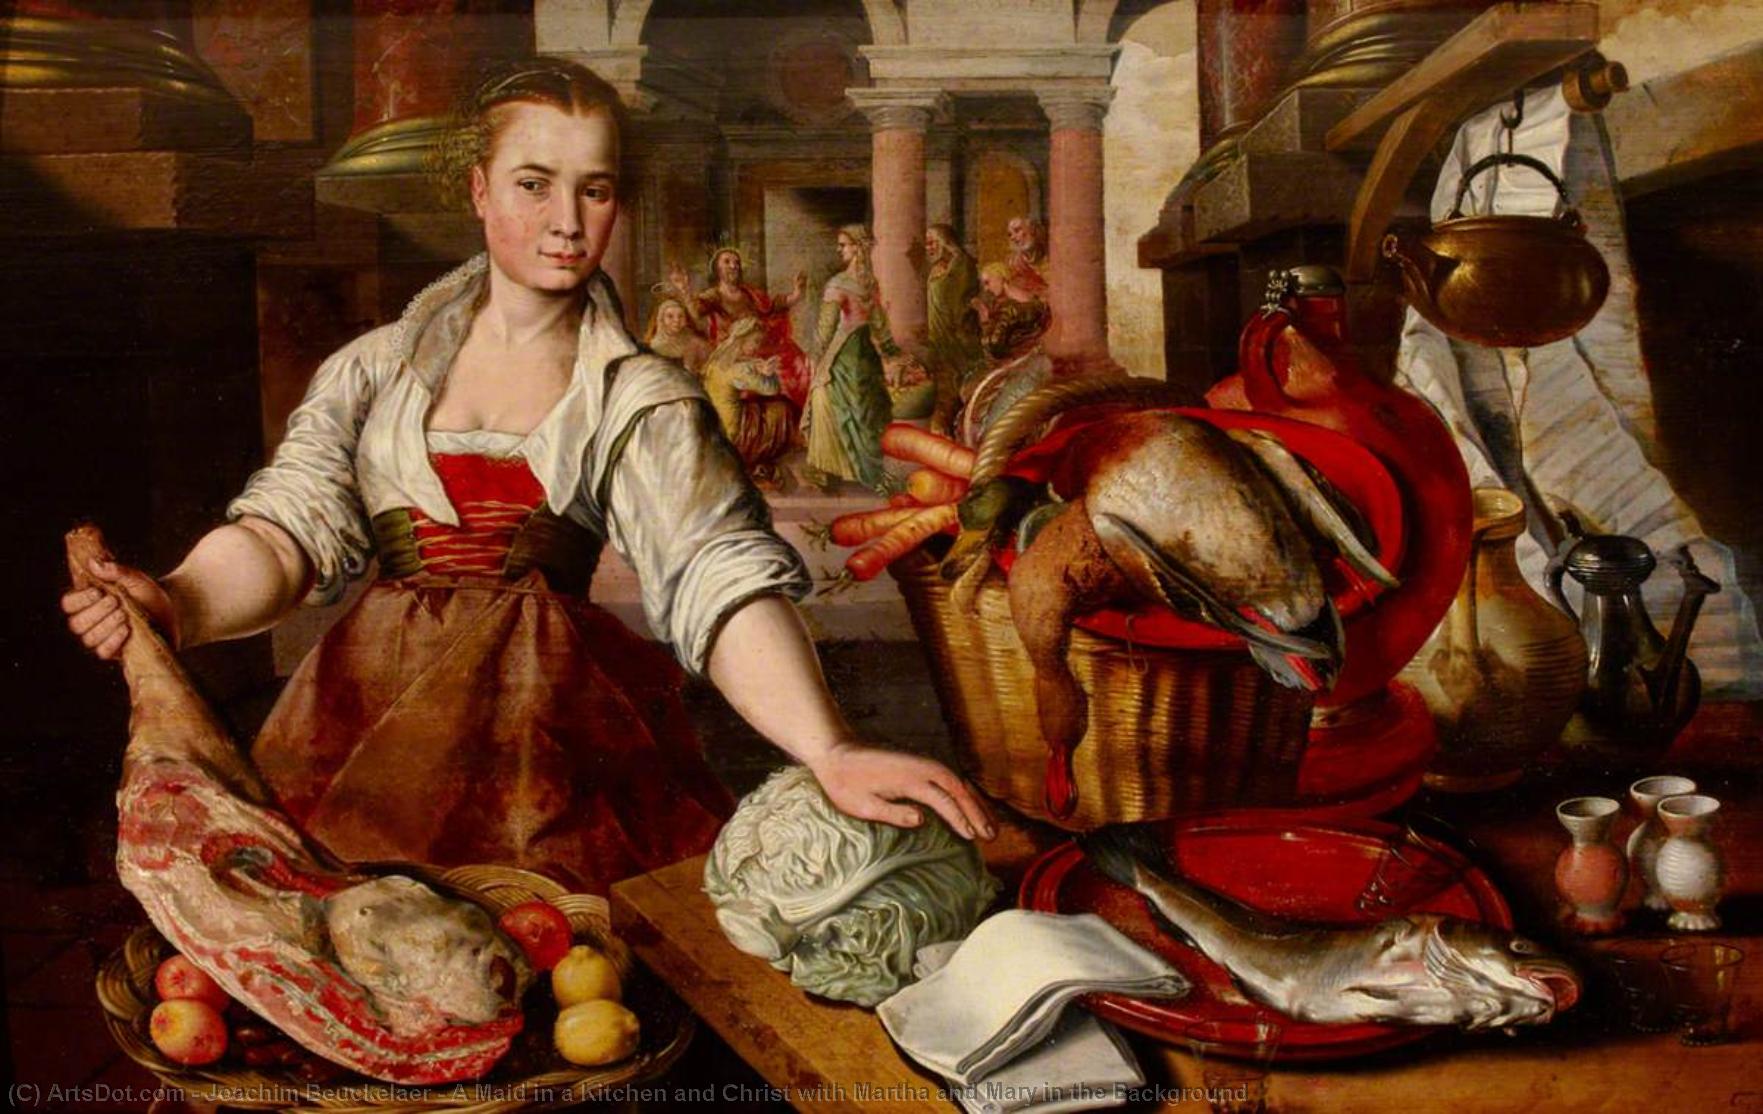 WikiOO.org - Enciclopédia das Belas Artes - Pintura, Arte por Joachim Beuckelaer - A Maid in a Kitchen and Christ with Martha and Mary in the Background